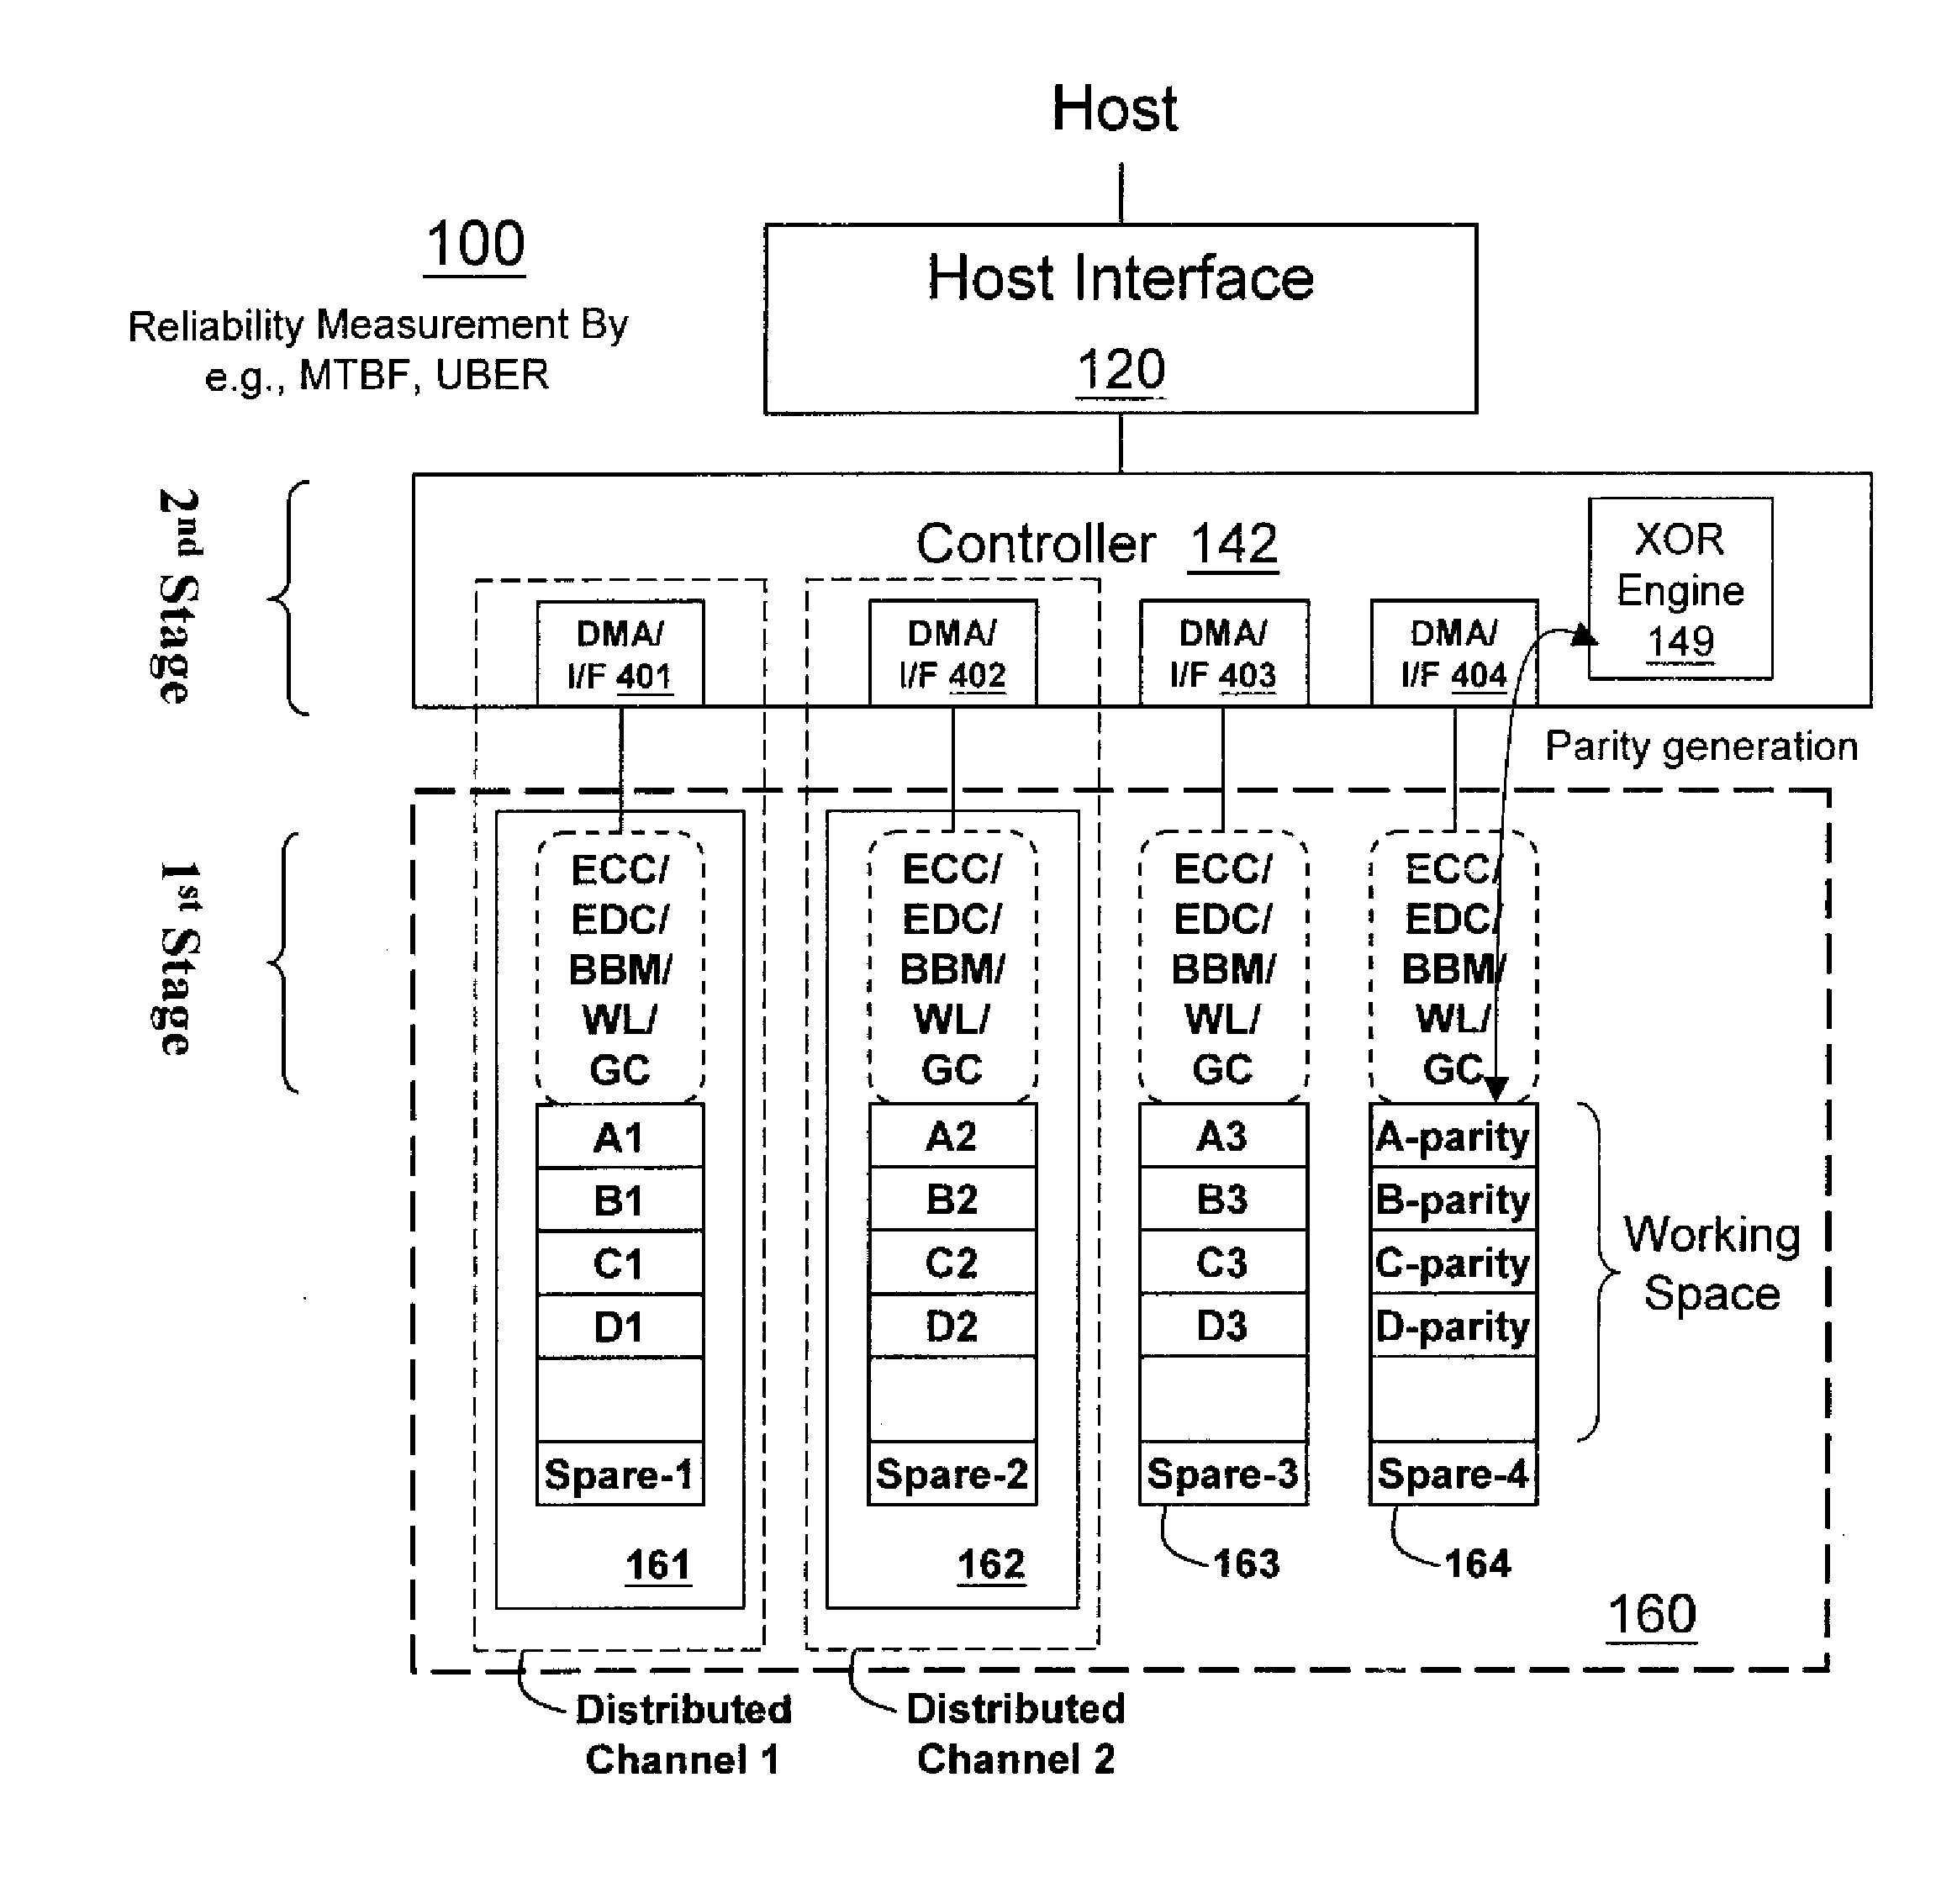 Non-volatile memory data storage system with reliability management